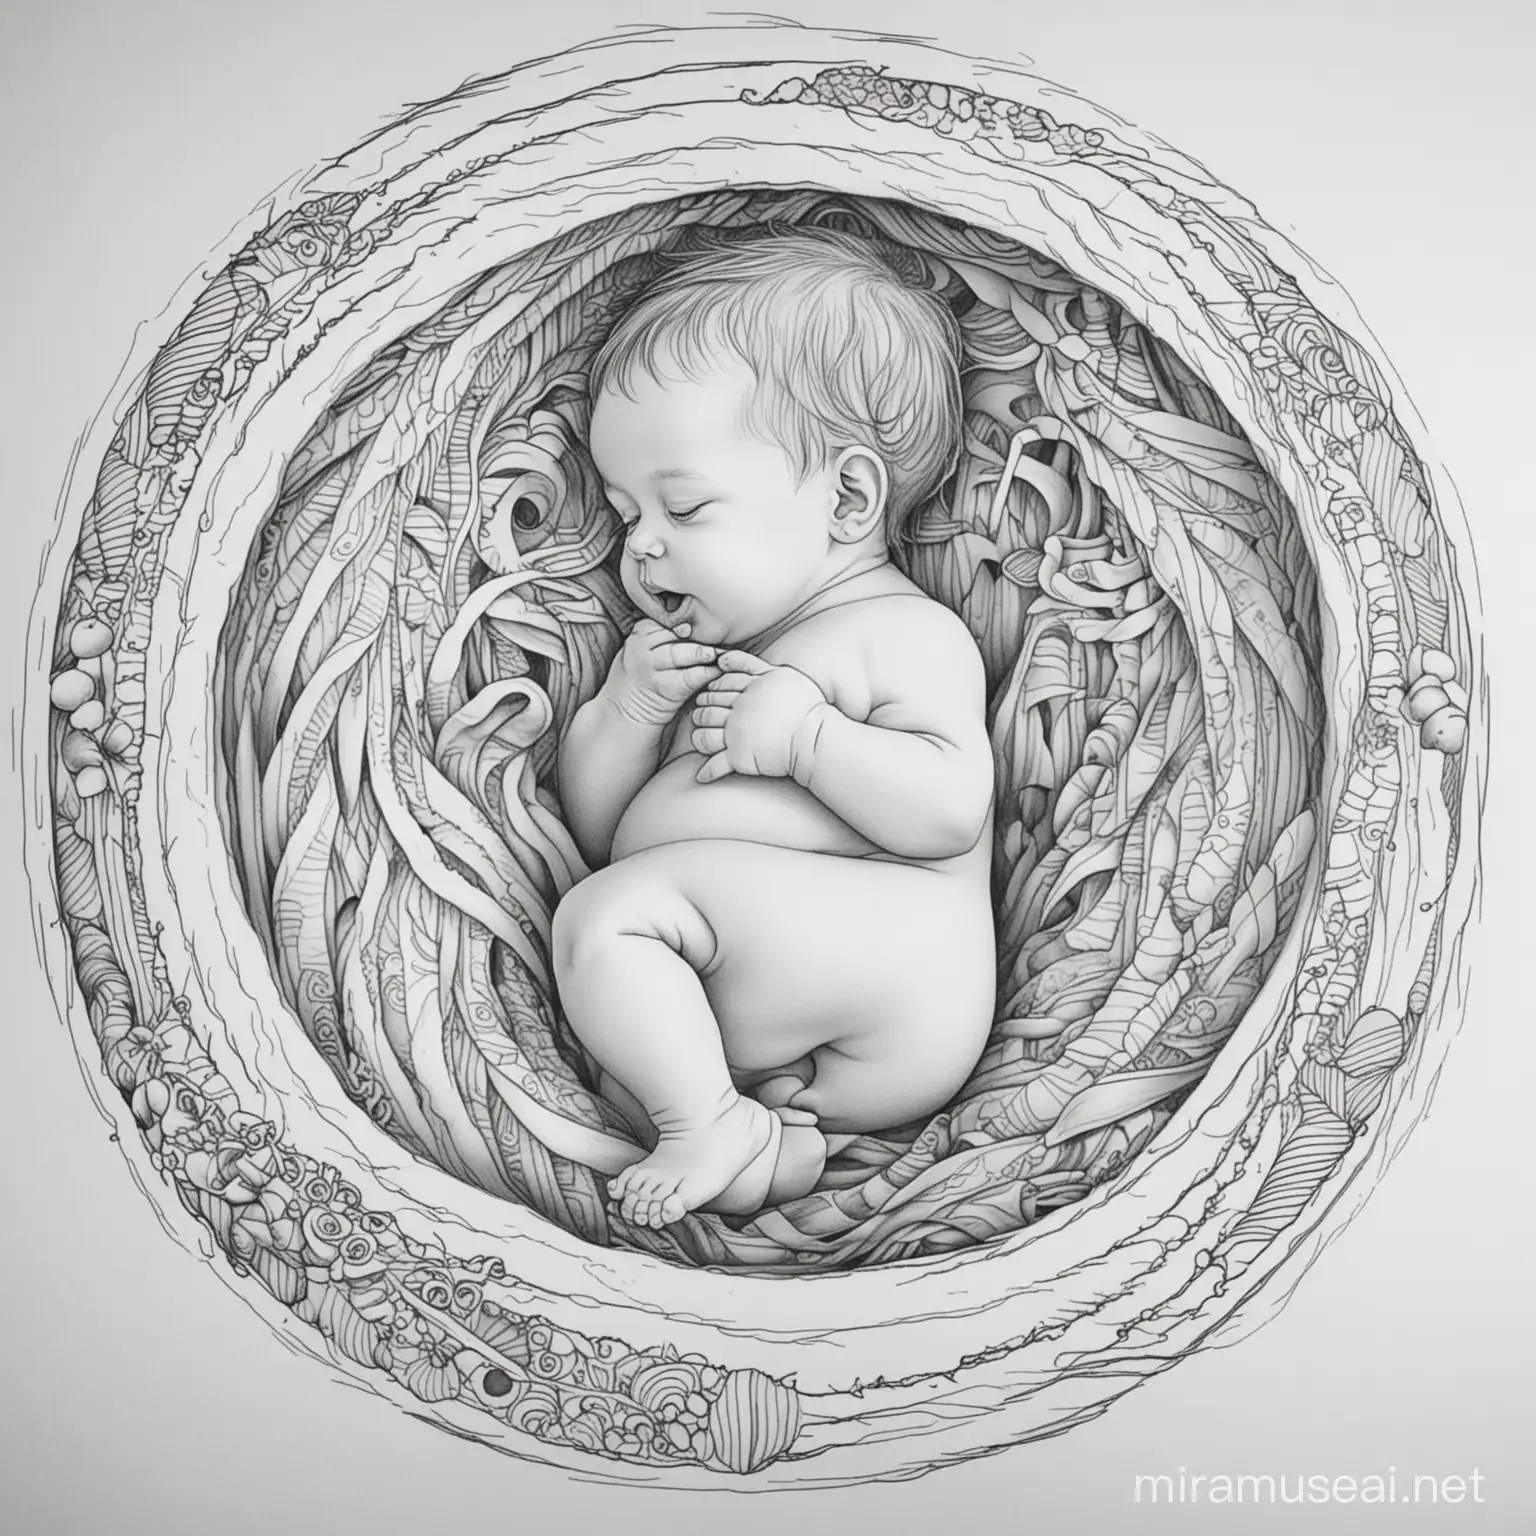 Innocent Baby in the Womb Coloring Page